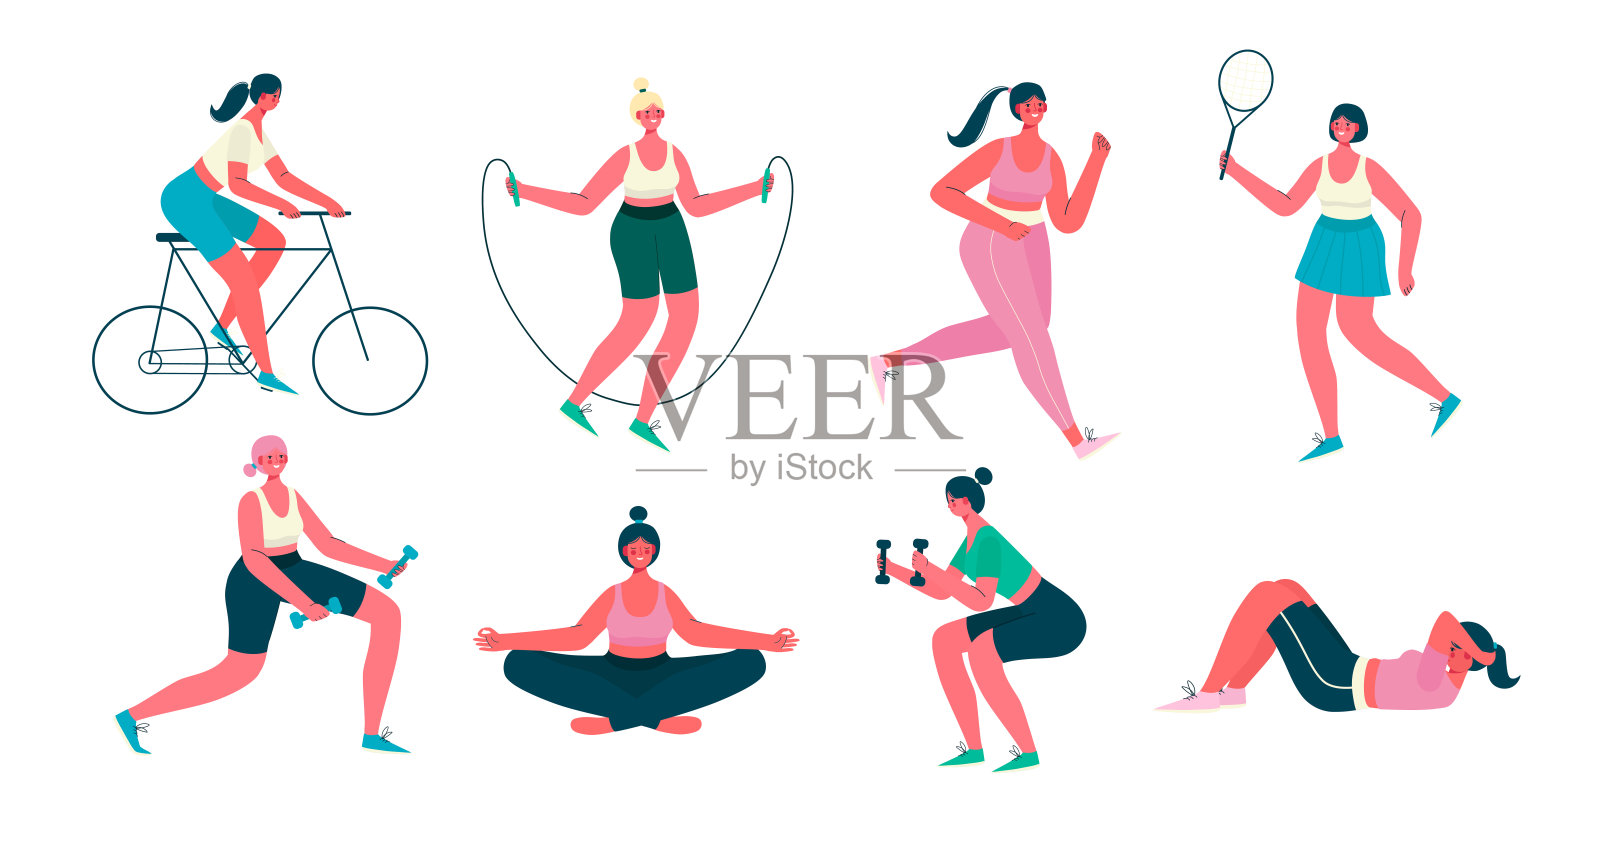 Woman activities. Set of women doing sports, yoga, riding the bicycle, jogging, jumping, fitness. Healthy lifestyle, active workout. Vector flat cartoon illustration isolated on white background.插画图片素材